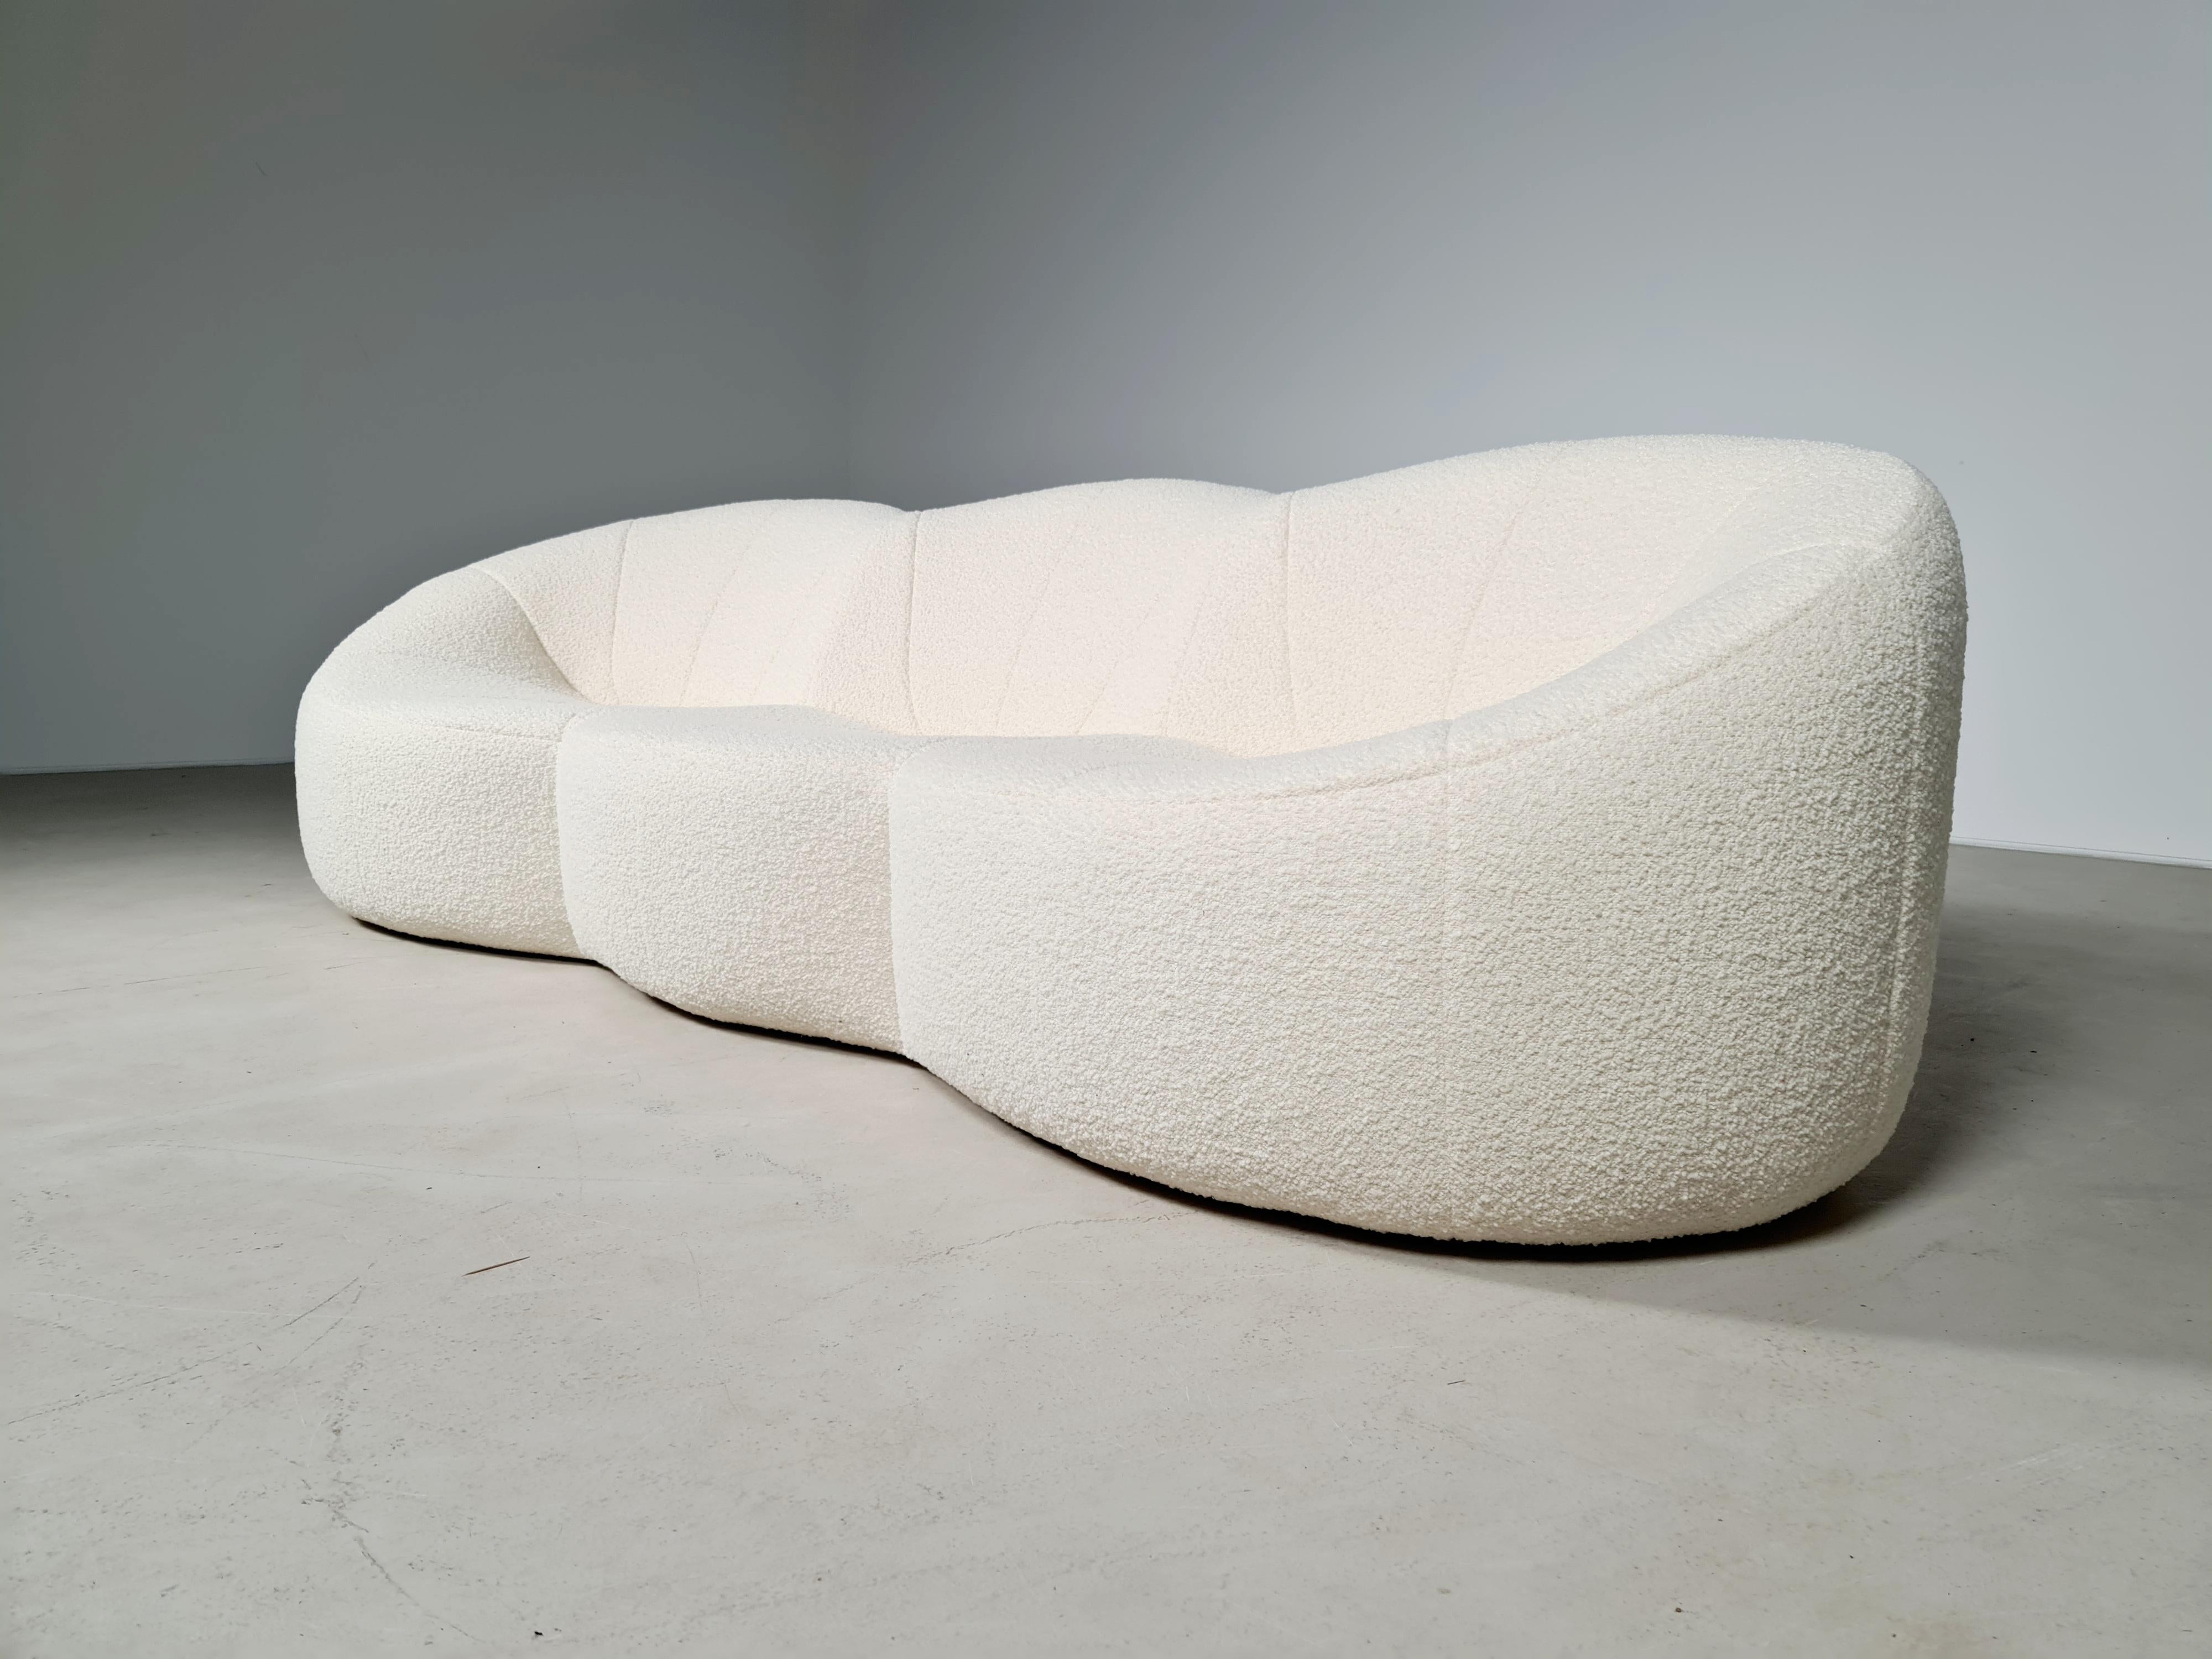 Pumpkin 3-seater sofa designed by Pierre Paulin for Ligne Roset. Reupholstered in a boucle by Bisson Bruneel. A unique sofa. its first edition was for the private collection of former French president Georges Pompidou in the Elysée Palace. As